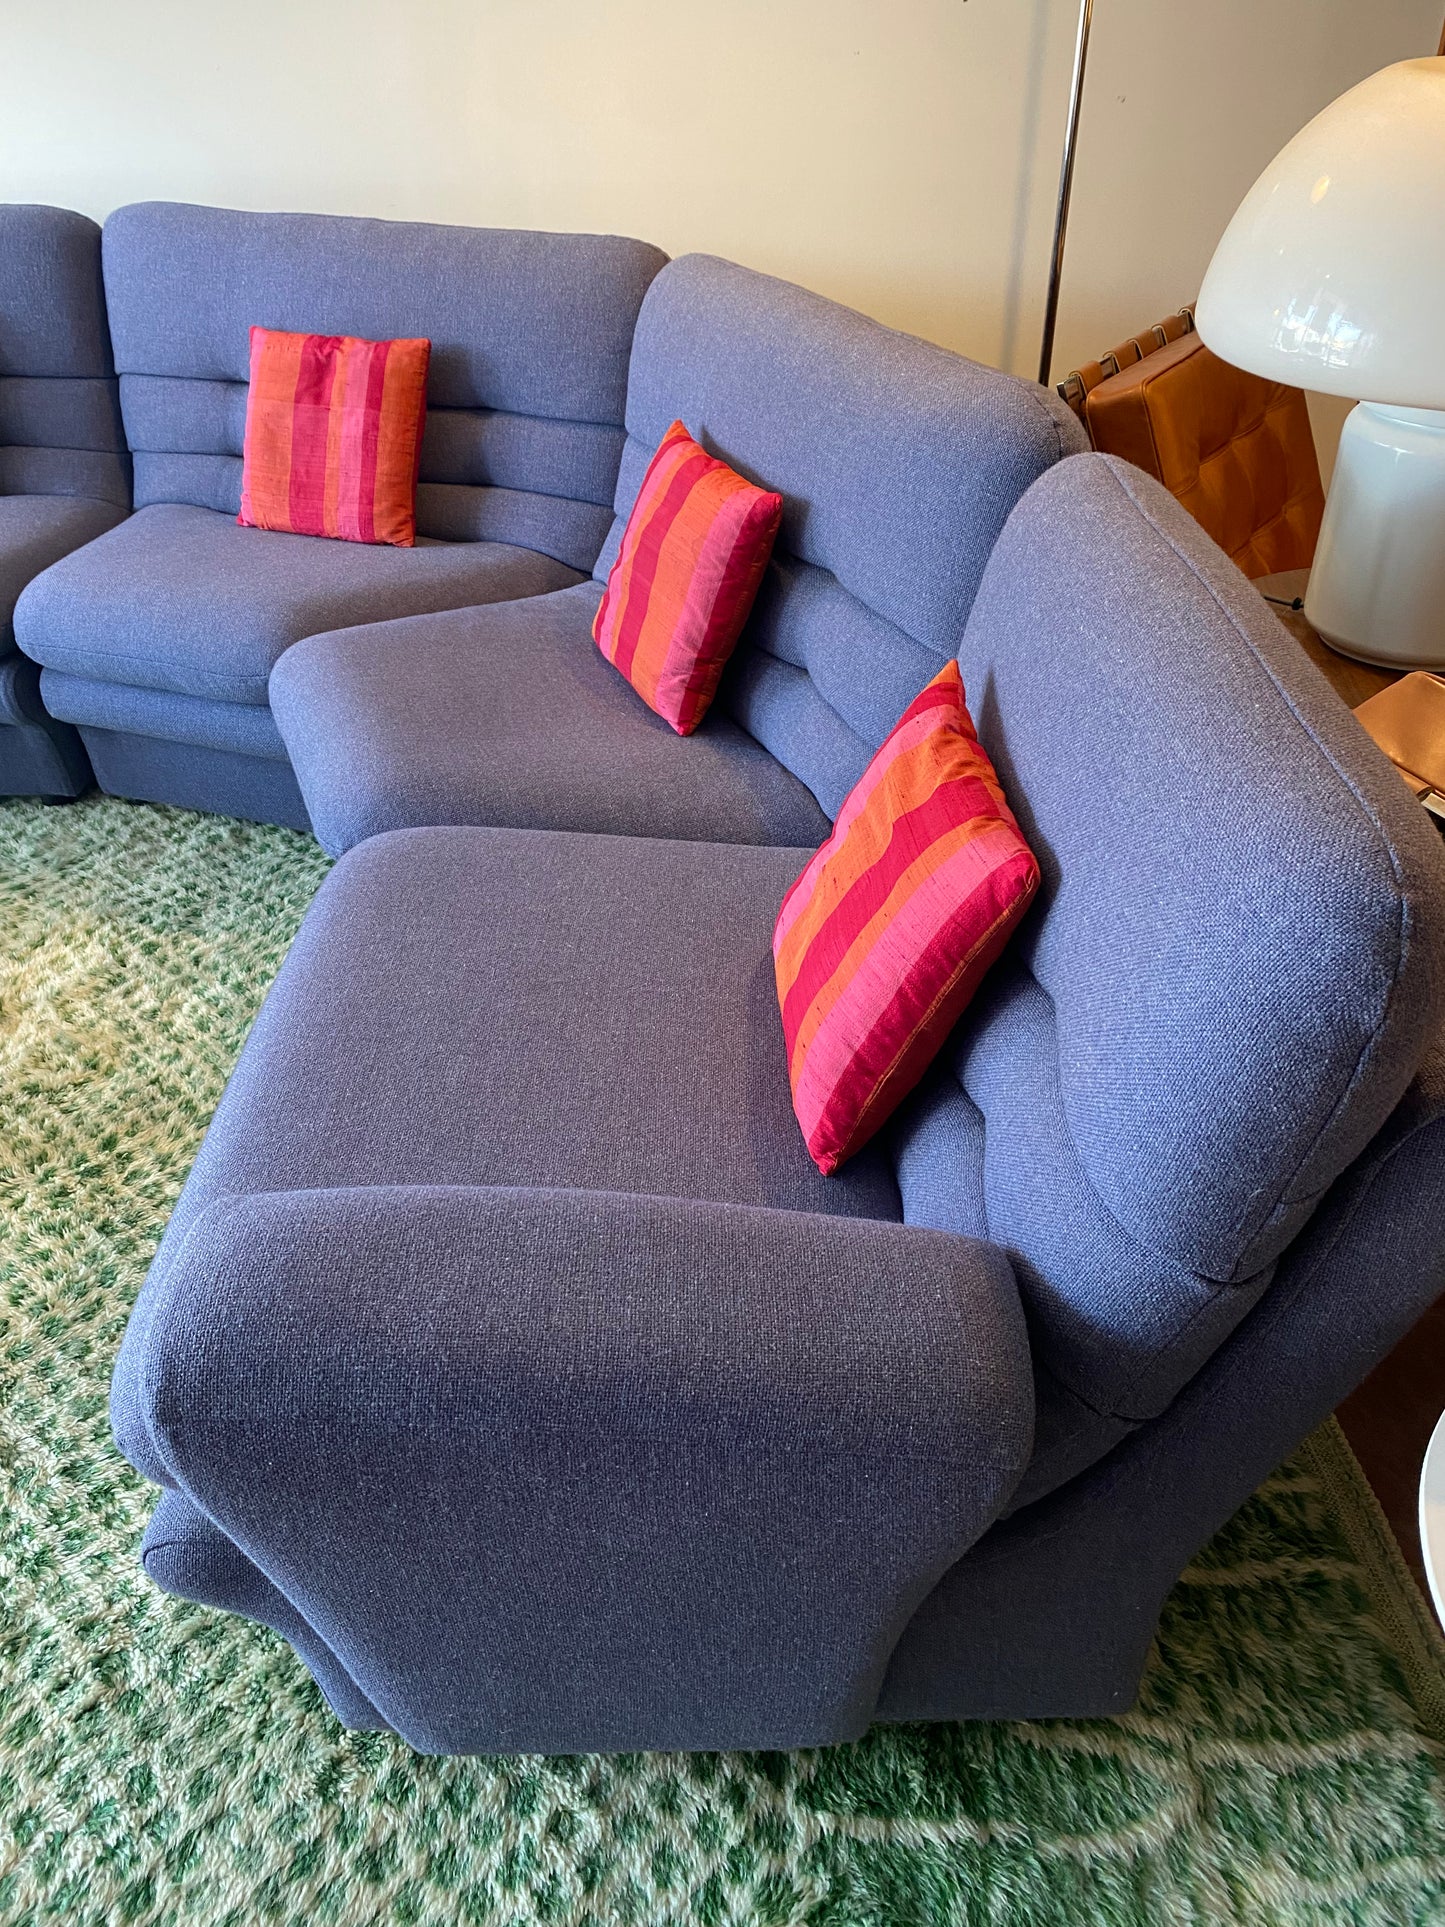 Vintage Lilac Wool Sectional Sofa 5 Pieces